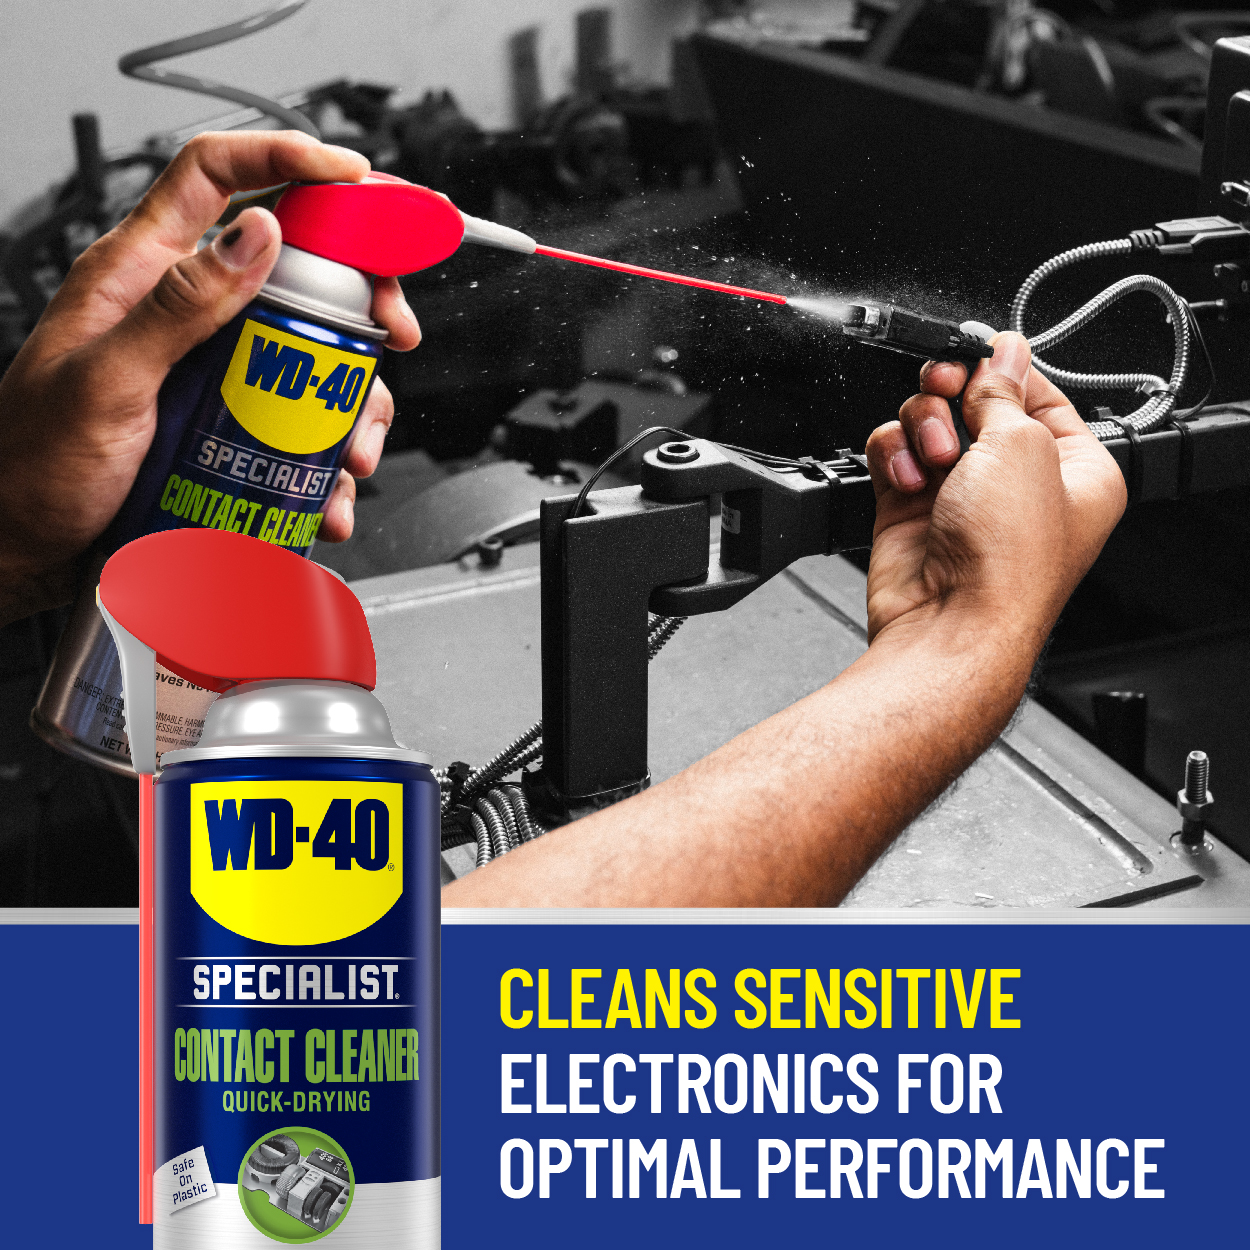 WD-40 Specialist Electrical Contact Cleaner, 11 oz - image 5 of 8